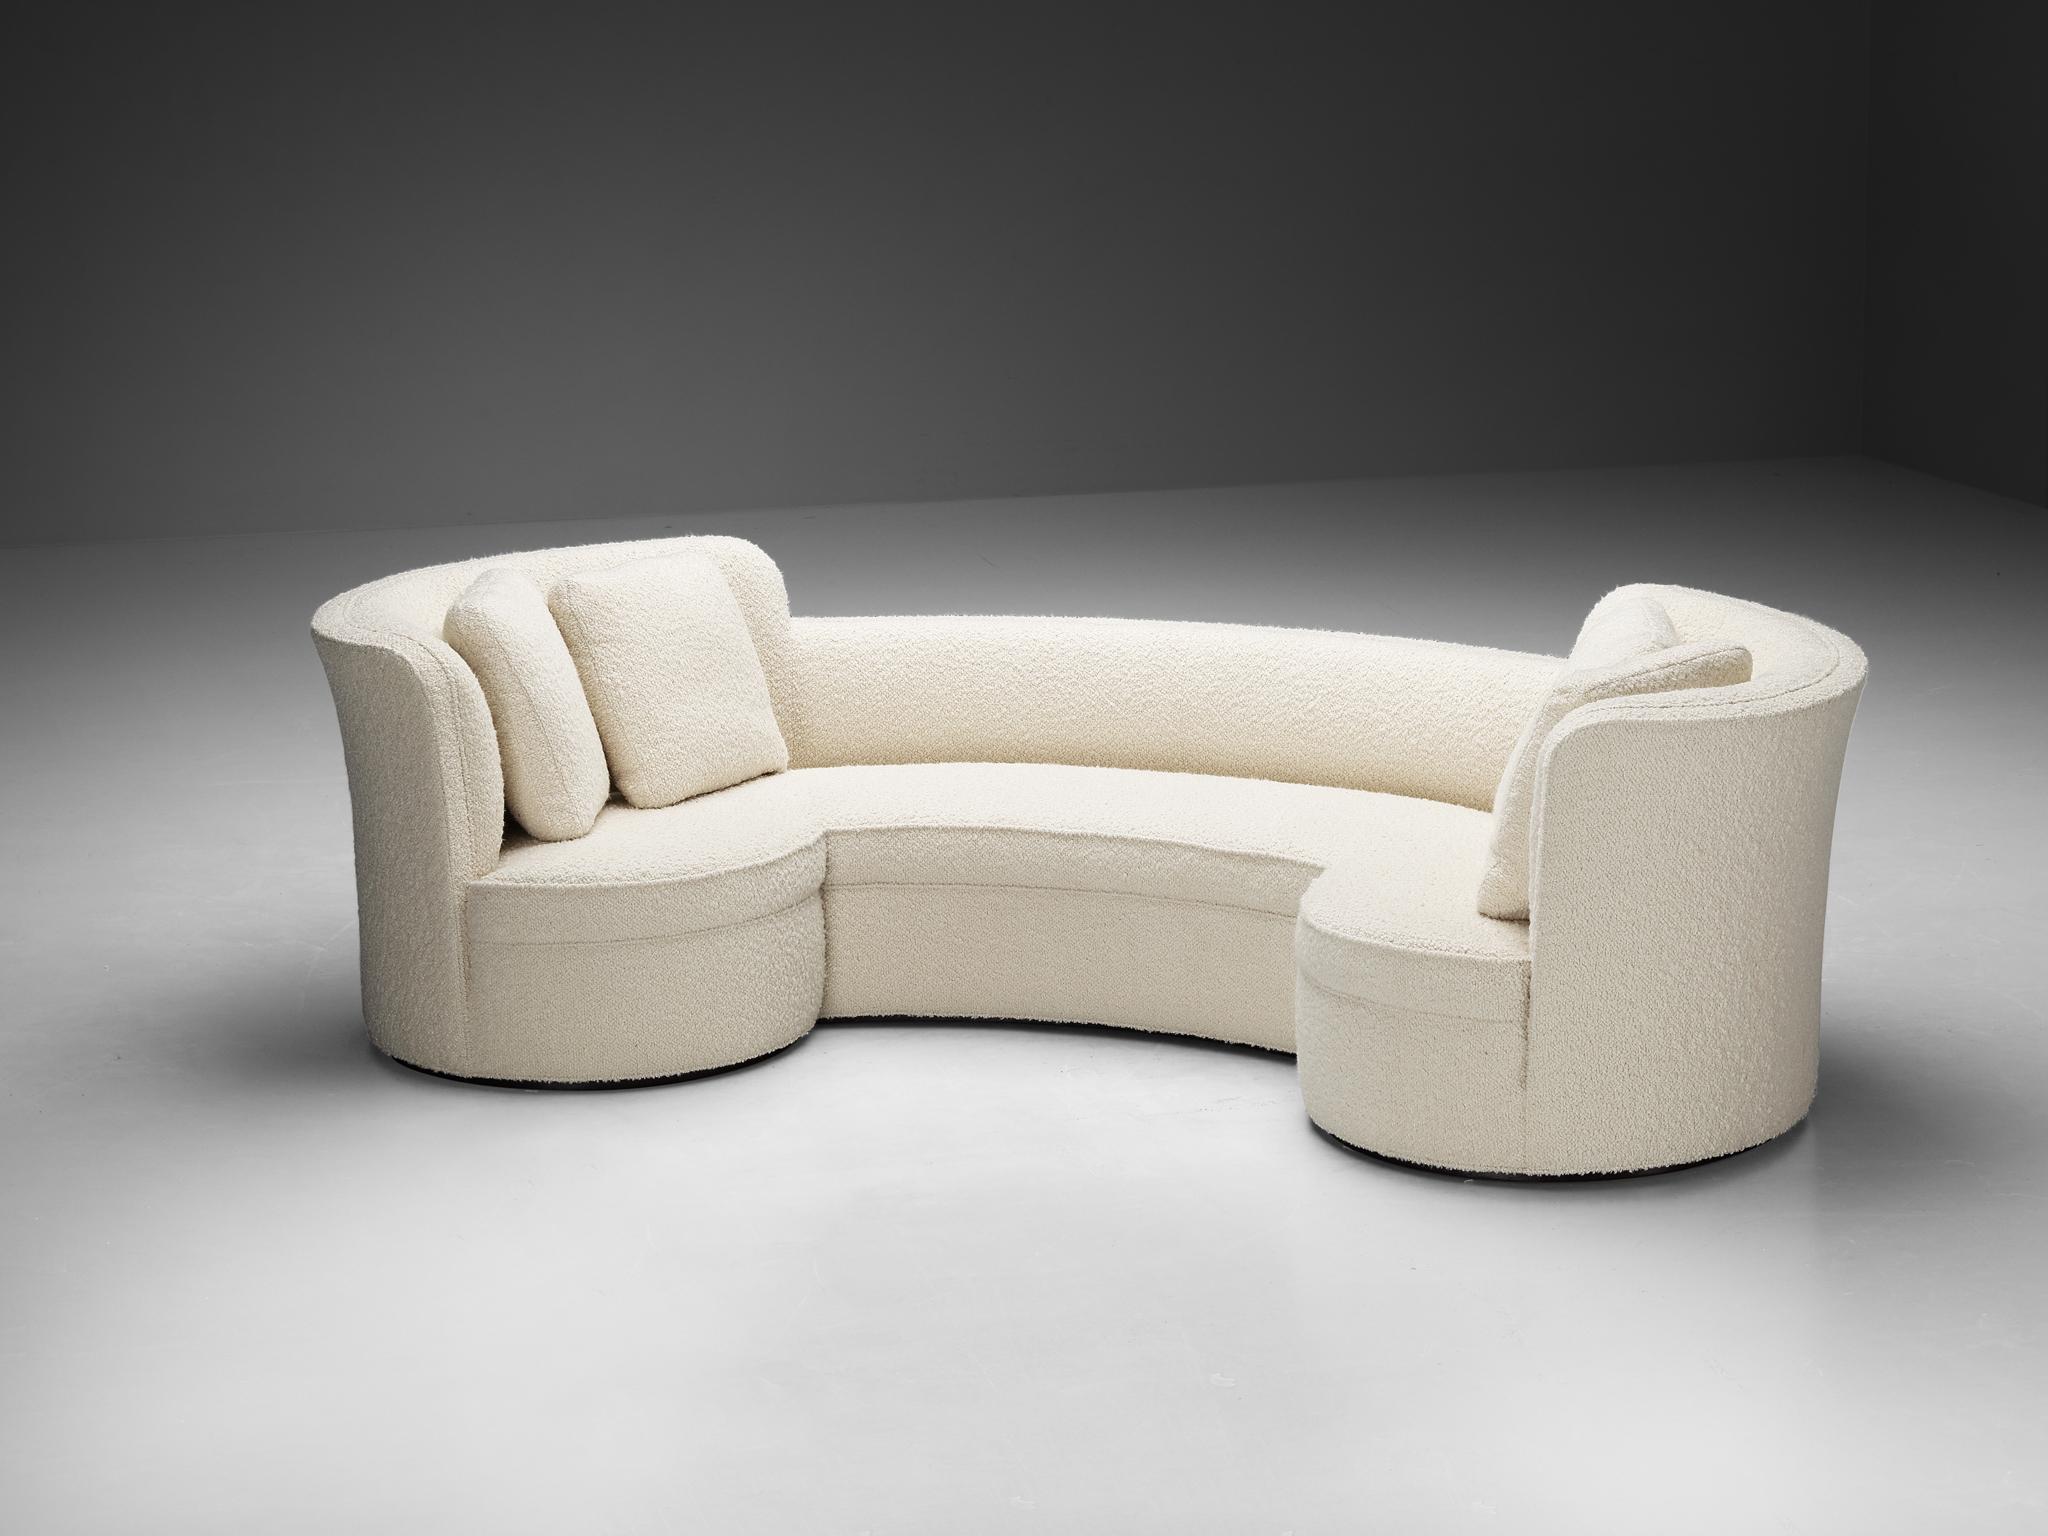 Edward Wormley for Dunbar, 'Oasis' sofa, model '5200', reupholstered in white boucle, wood, United States, 1952 

The 'Oasis' sofa (1952) is designed by Edward Wormley for Dunbar. The construction is defined by a crescent shape with round edges and